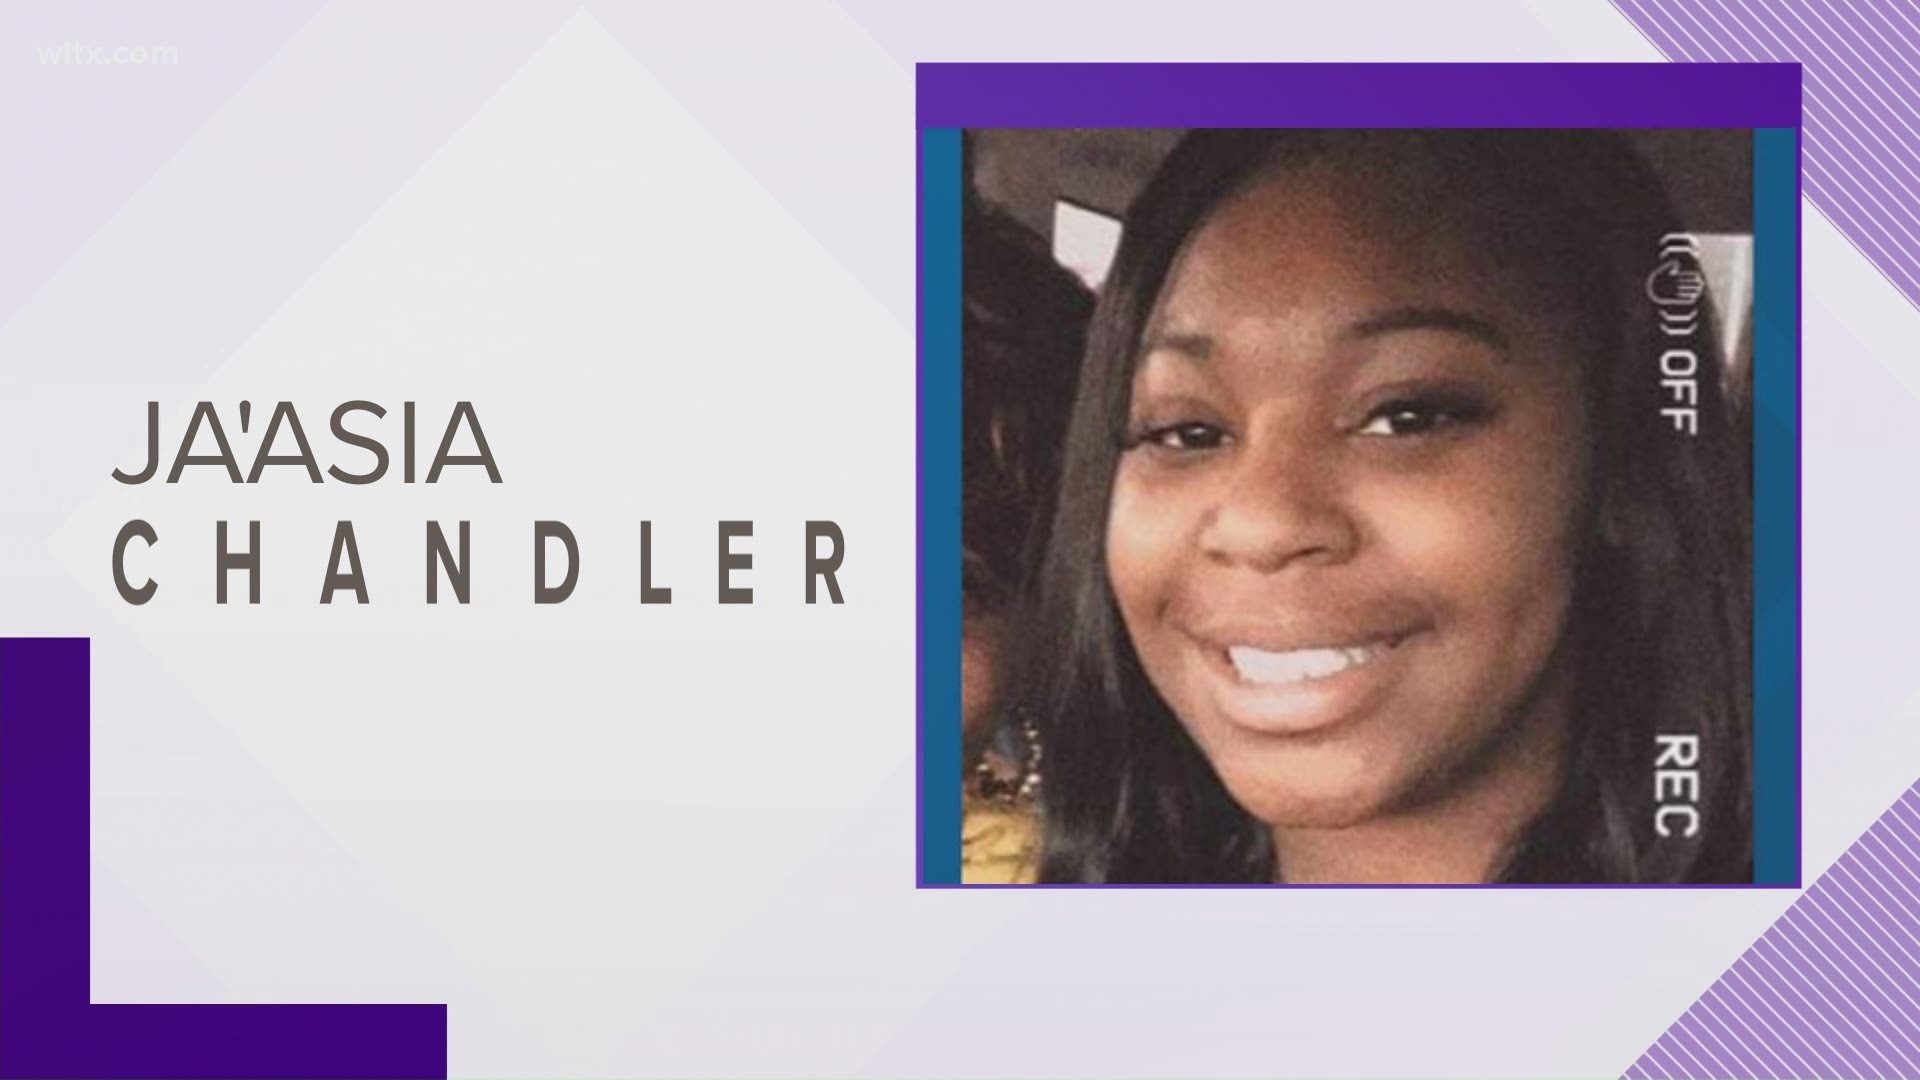 Officers say they need to find 14-year-old Ja'Asia Chandler. She was last seen on Rogers Avenue at night on Monday, May 10.